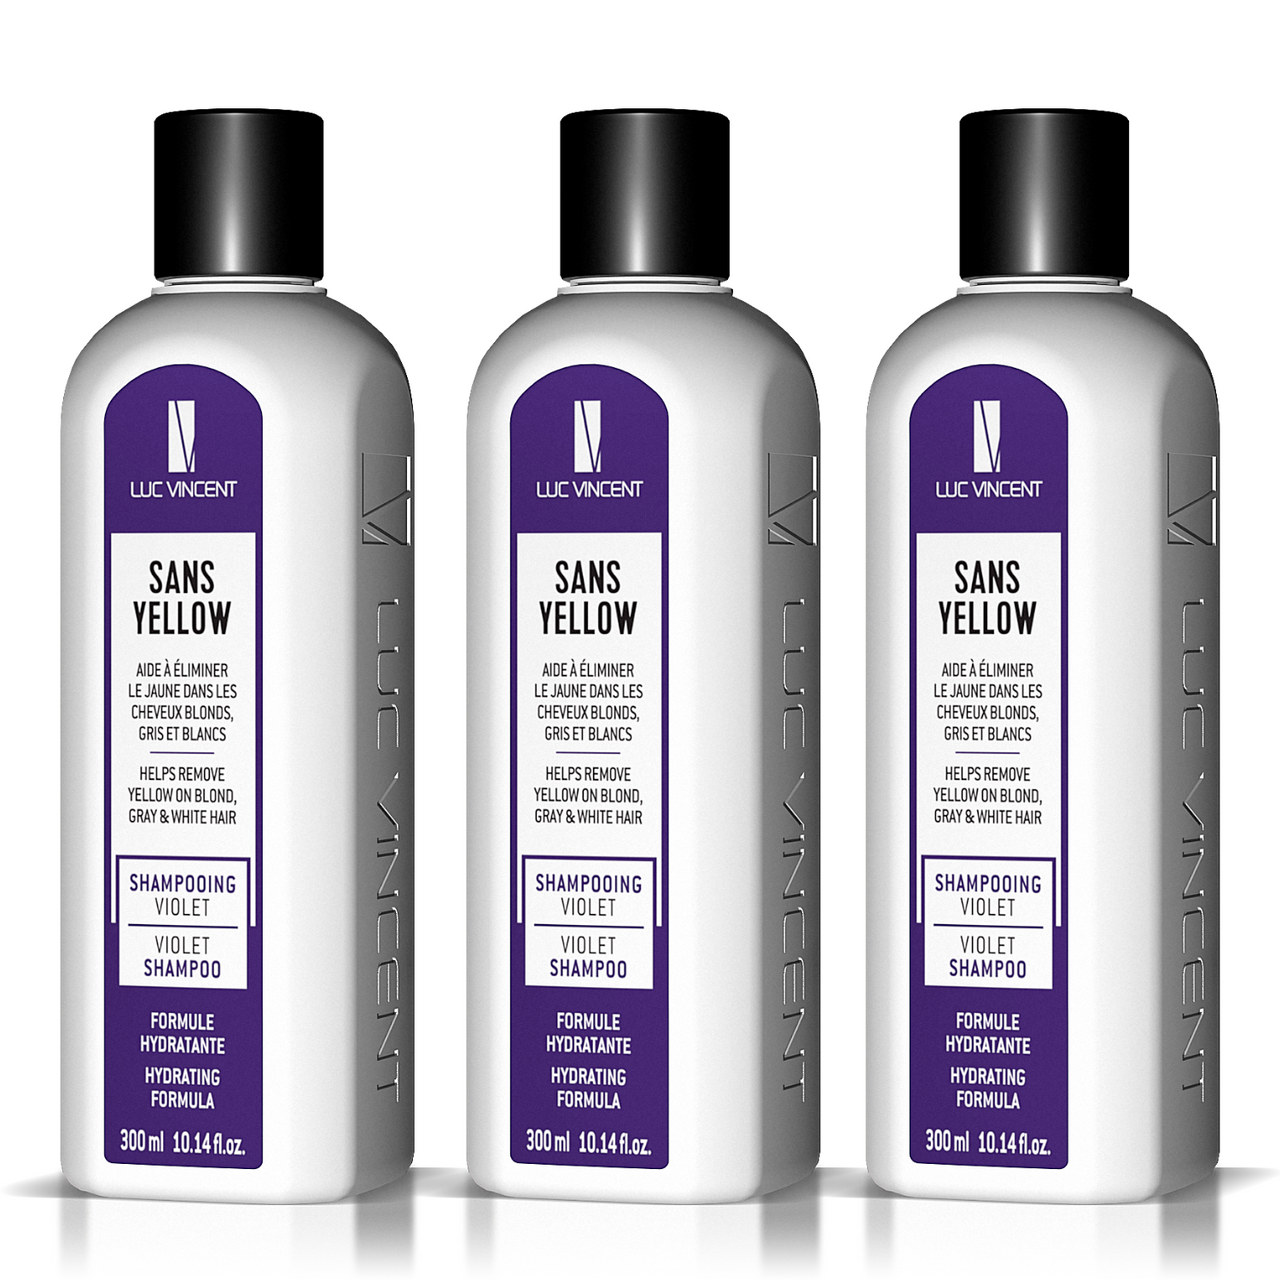 3 "SANS YELLOW" Shampoo - Special offer